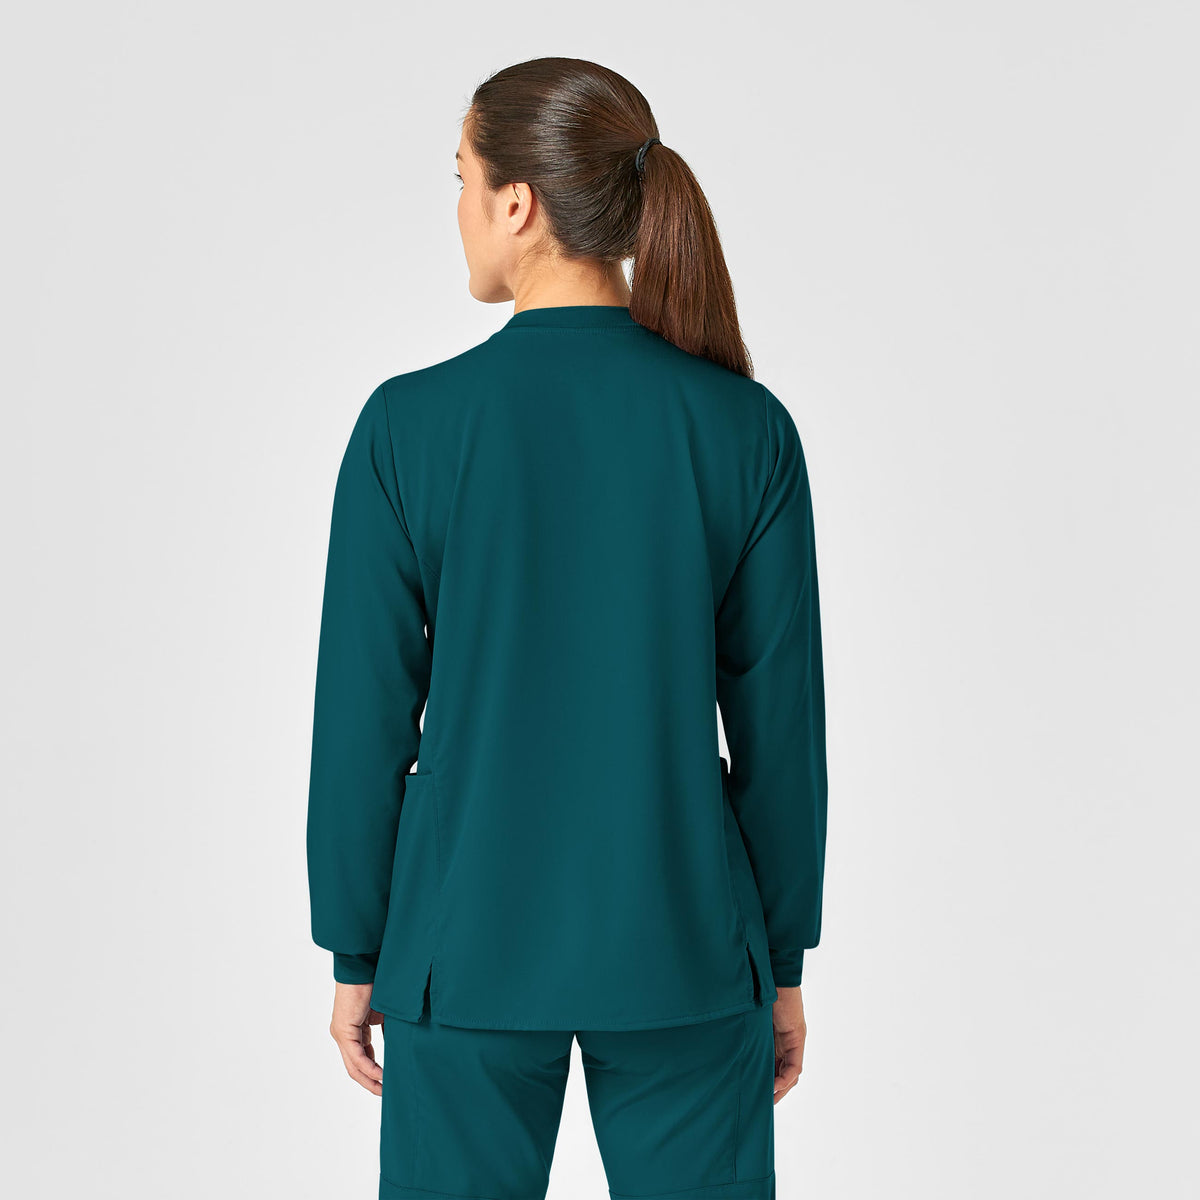 PRO Women's Snap Front Warm-Up Jacket Caribbean Blue back view